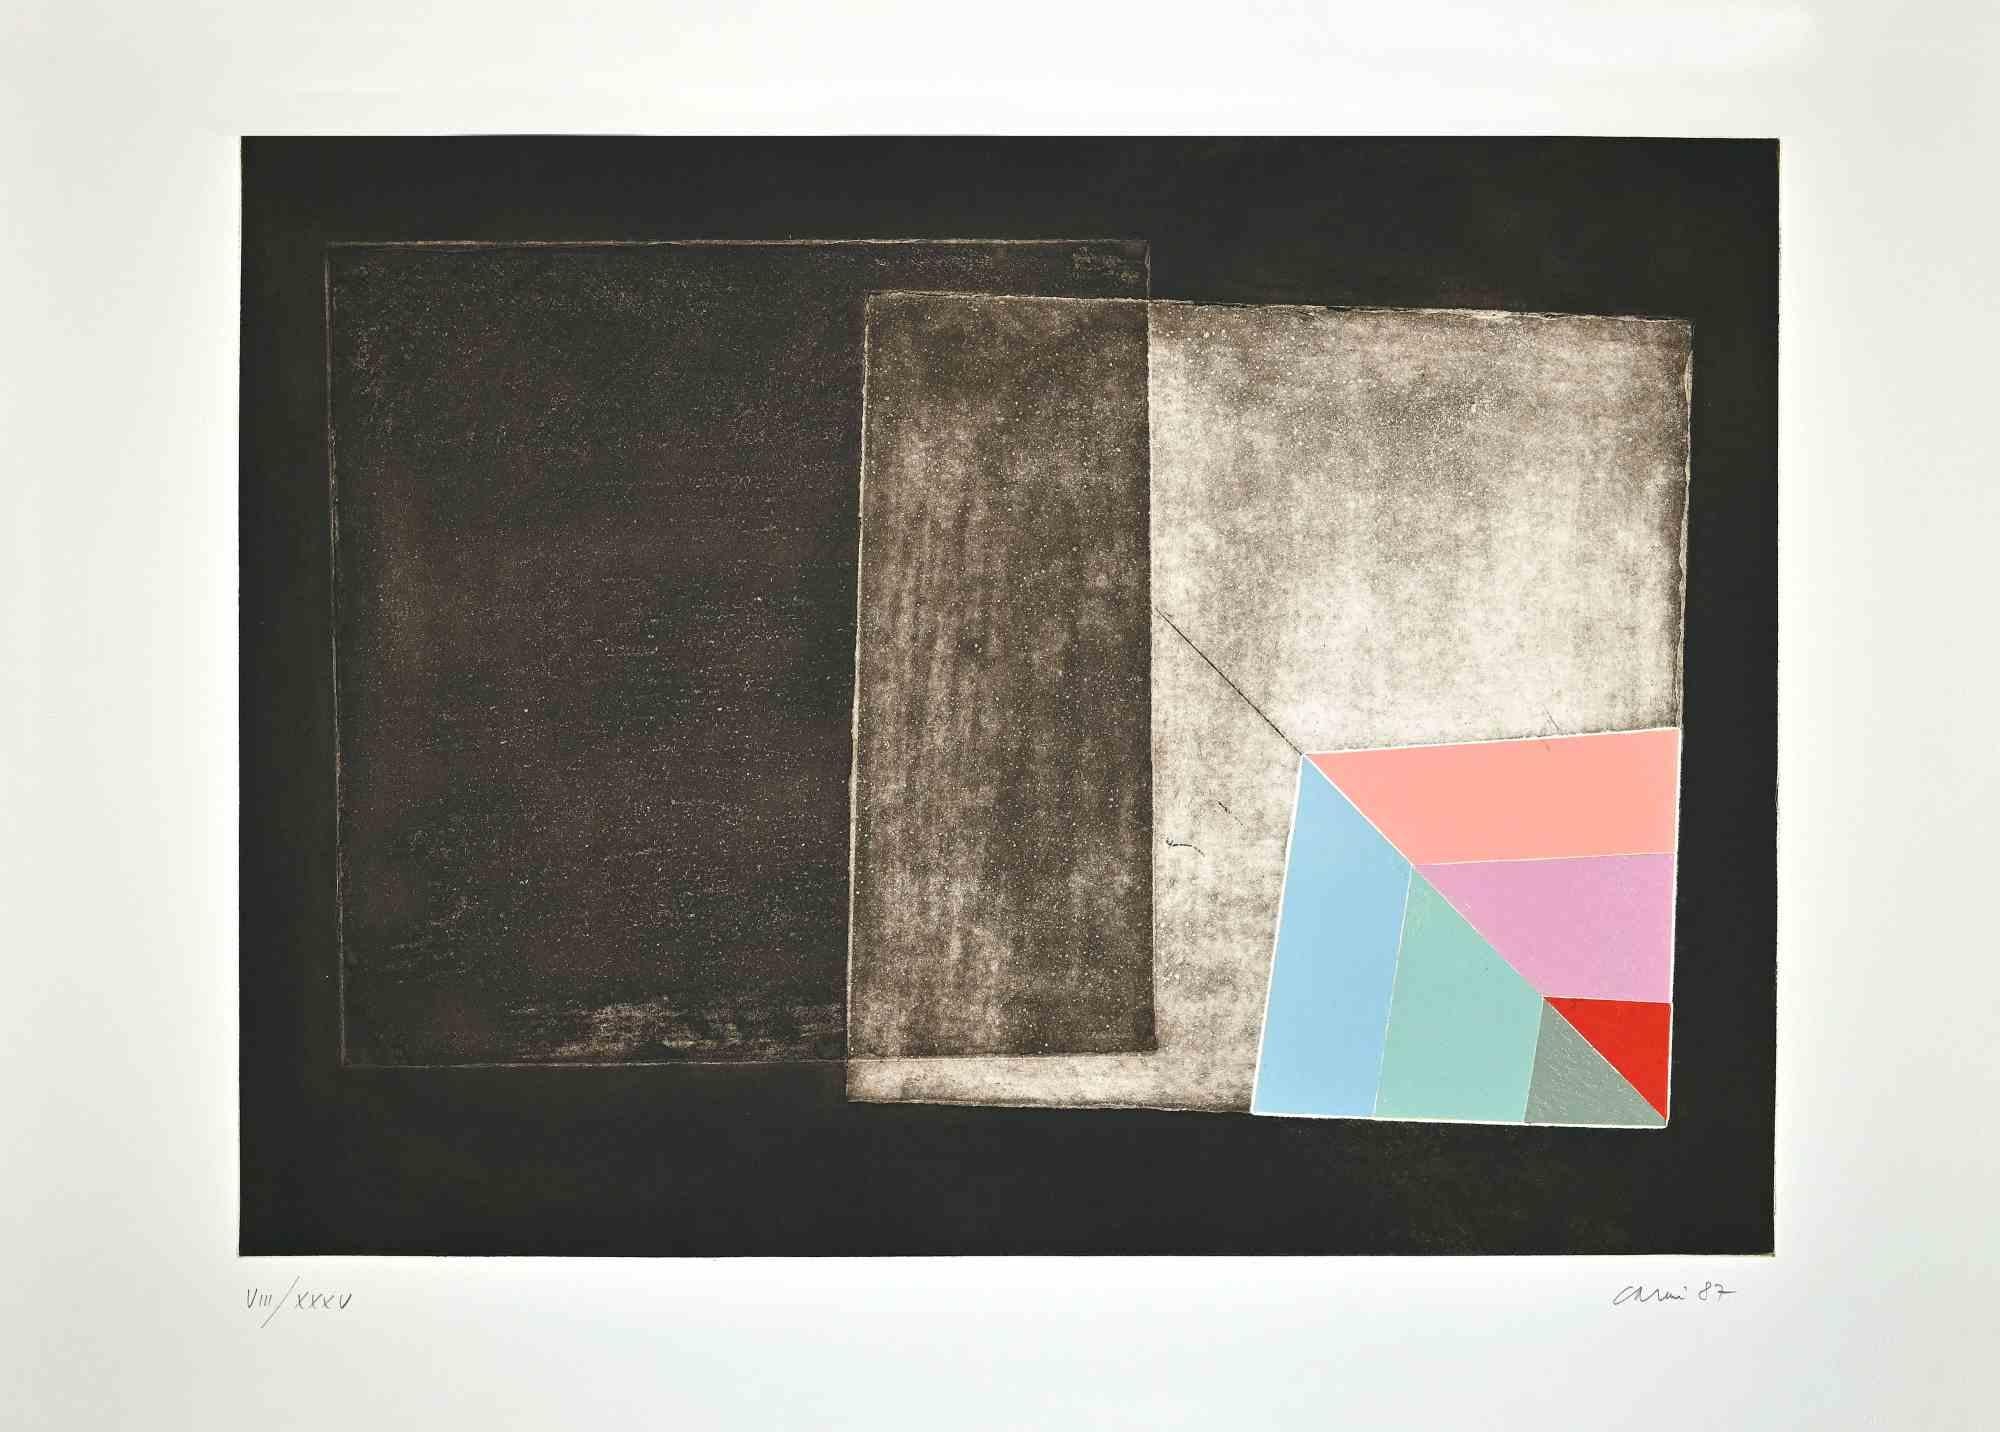 Abstract Composition is an original etching made by Eugenio Carmi (Genoa, 1920 - Lugano, 2016) in 1987.

Good conditions.

Hand signed and numbered. Edition, VIII/XXXV.

Eugenio Carmi (Genoa, 1920 - Lugano, 2016) was an Italian painter, an exponent